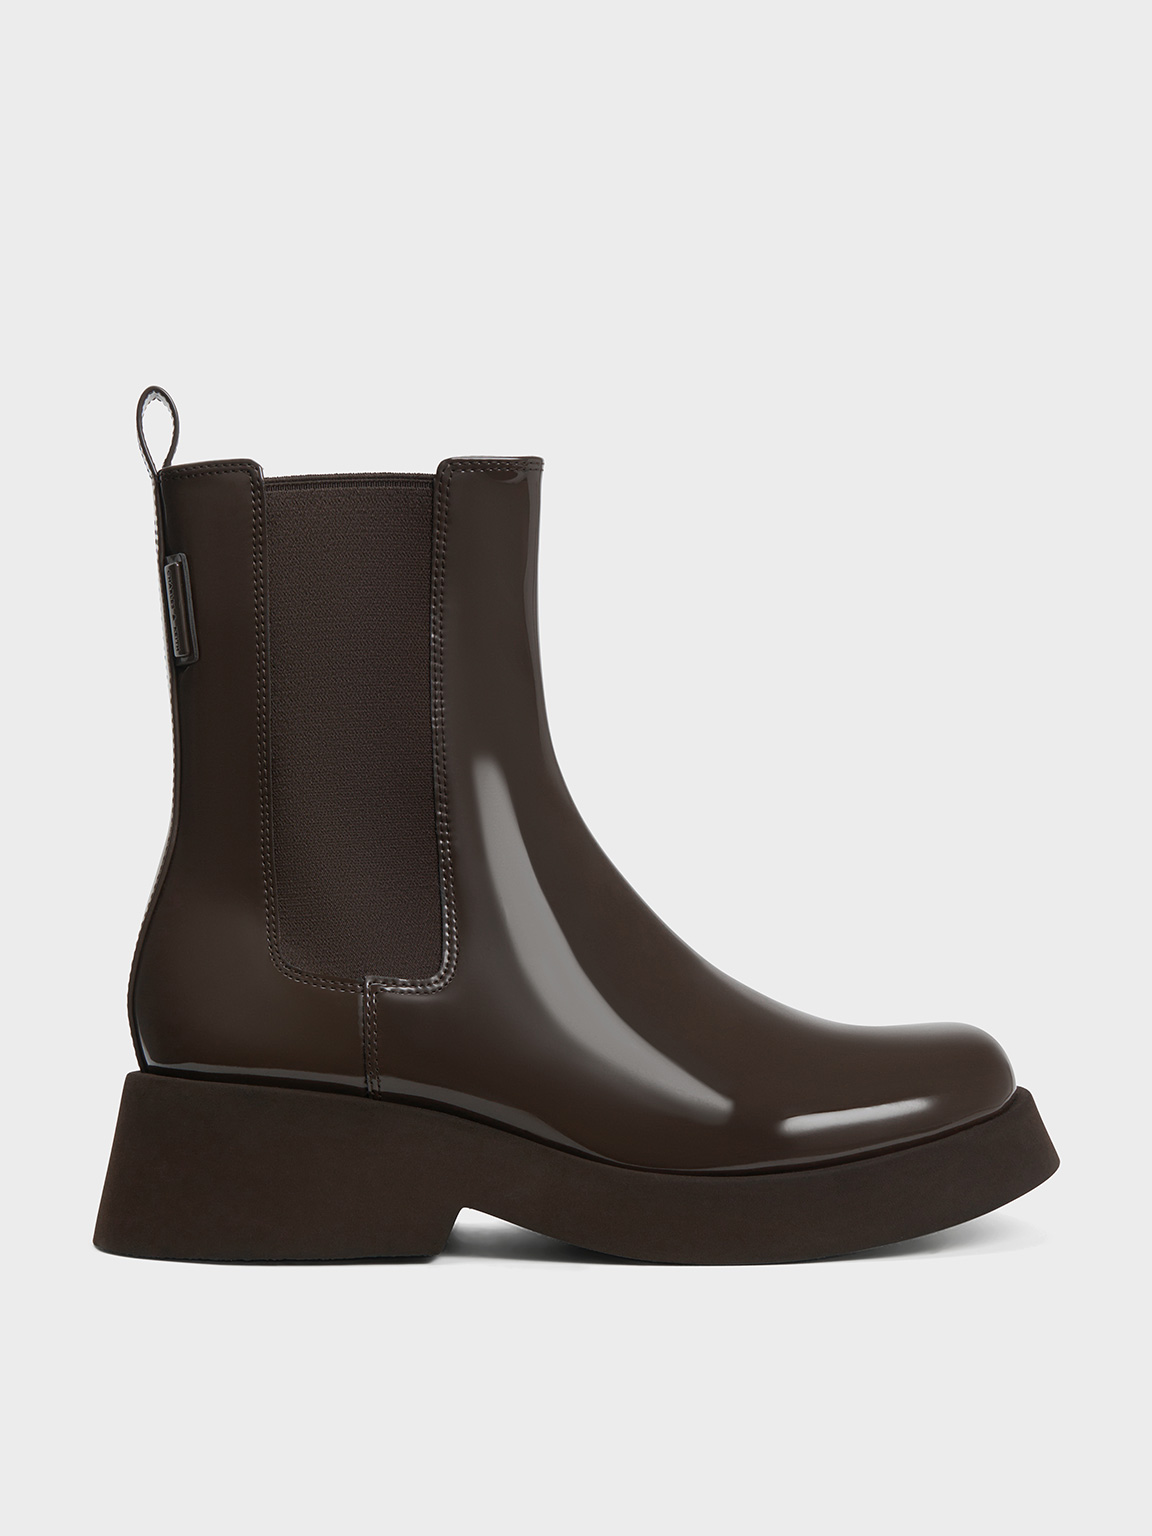 Charles & Keith Giselle Patent Chelsea Boots In Brown